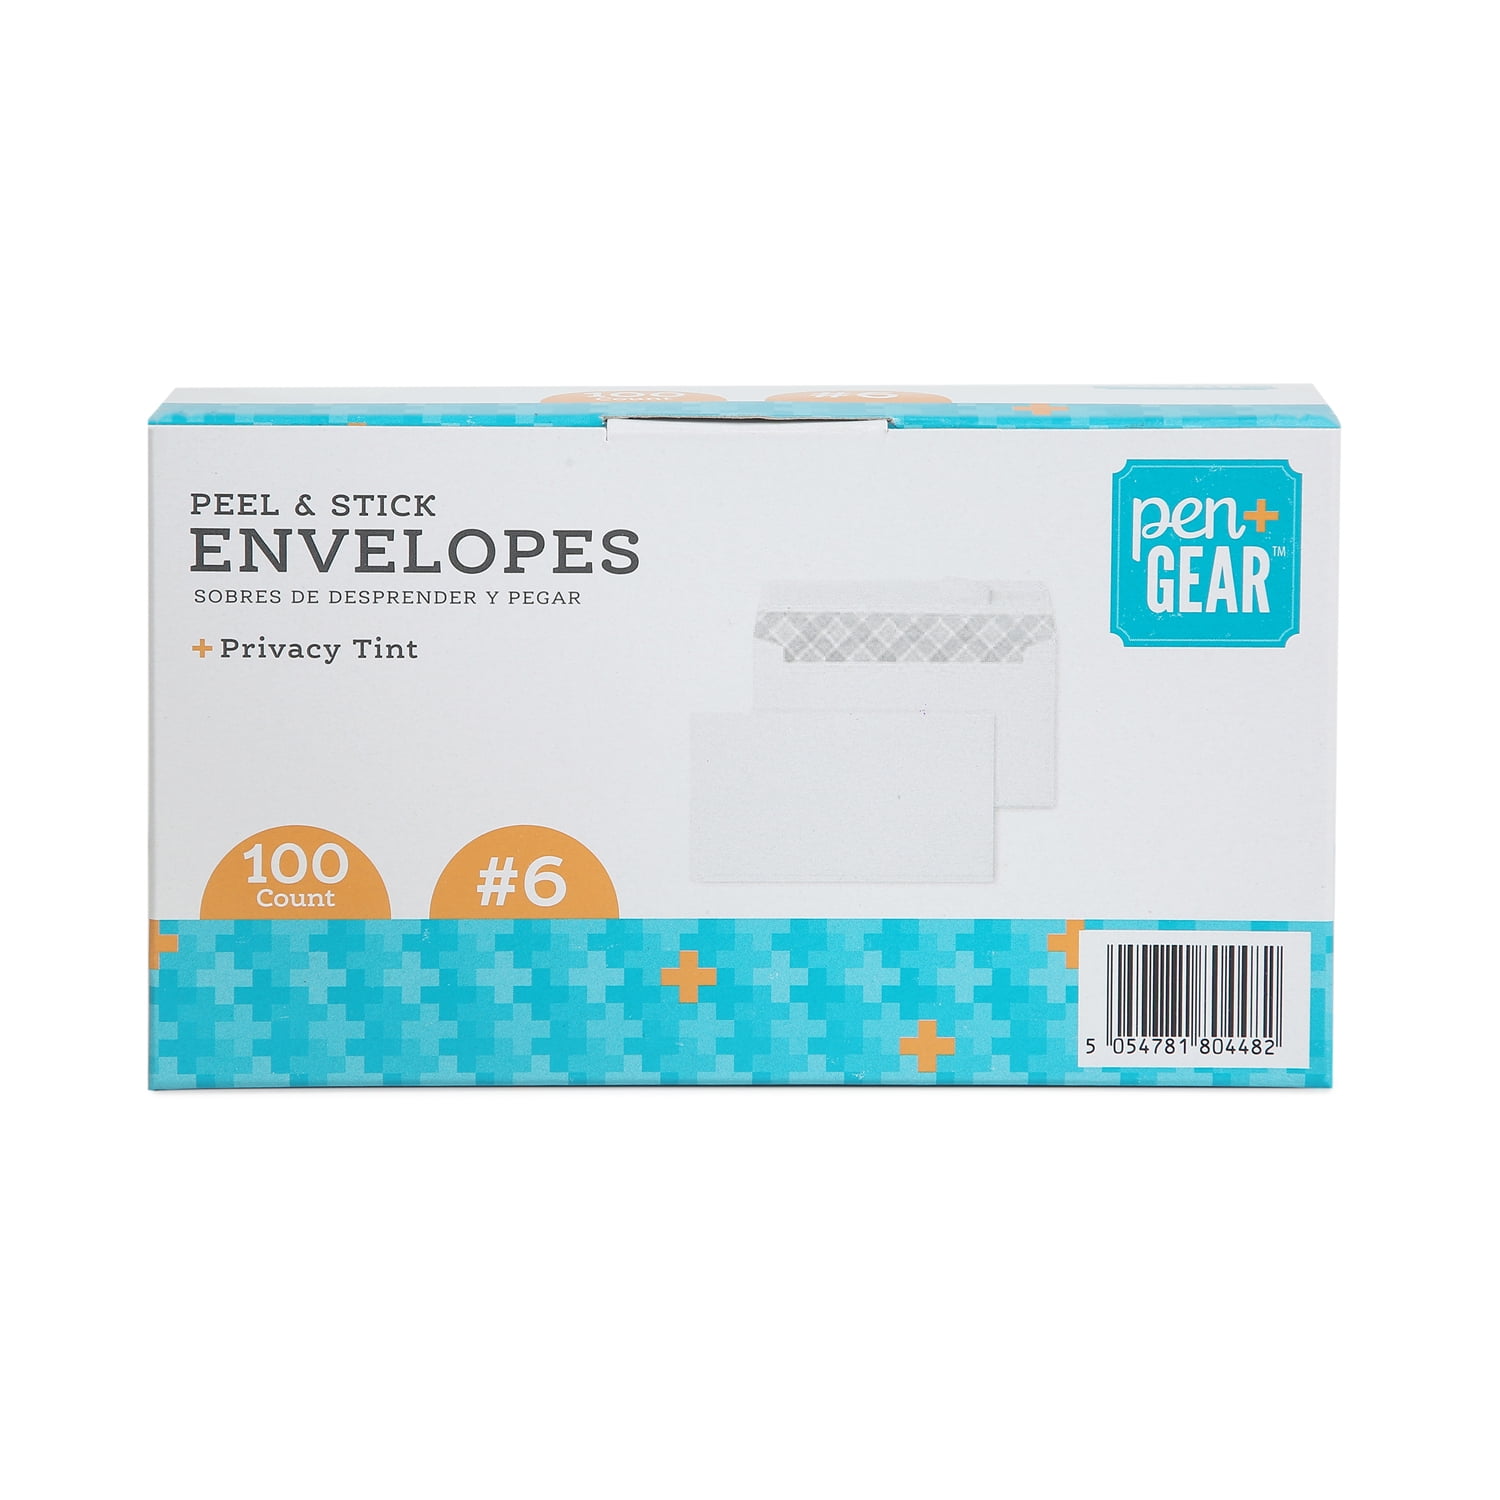 Pen+Gear #6 Privacy Tint Peel and Stick Envelopes, White, 3.63" x 6.5", 100 Count